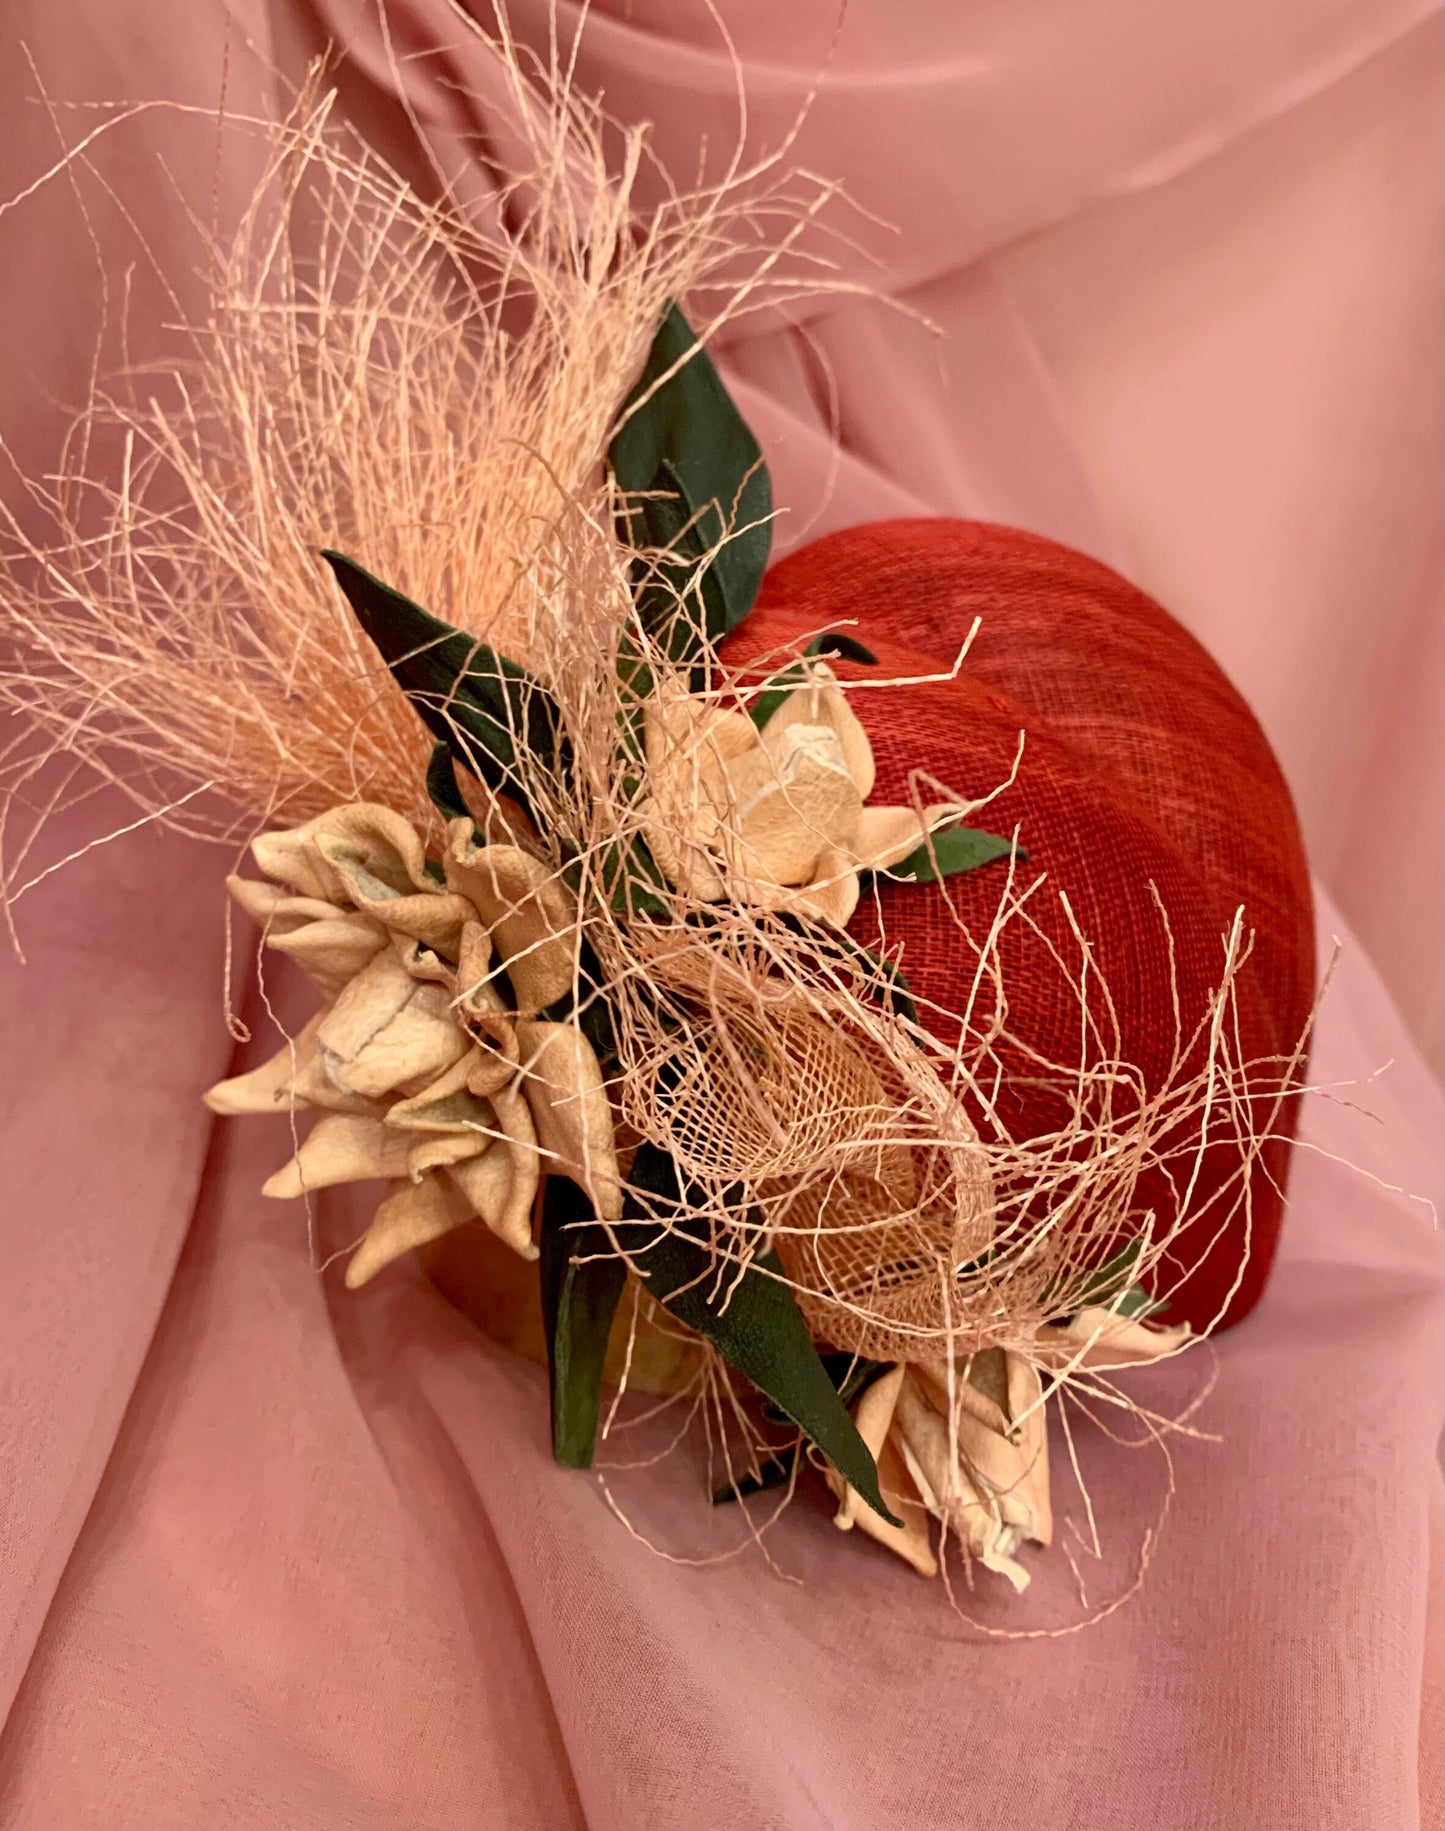 Valentine’s Day One-Of-A-Kind, Just like you! Charming Fascinator to bring out your love and romance! Feminine-Classic-Custom Design!